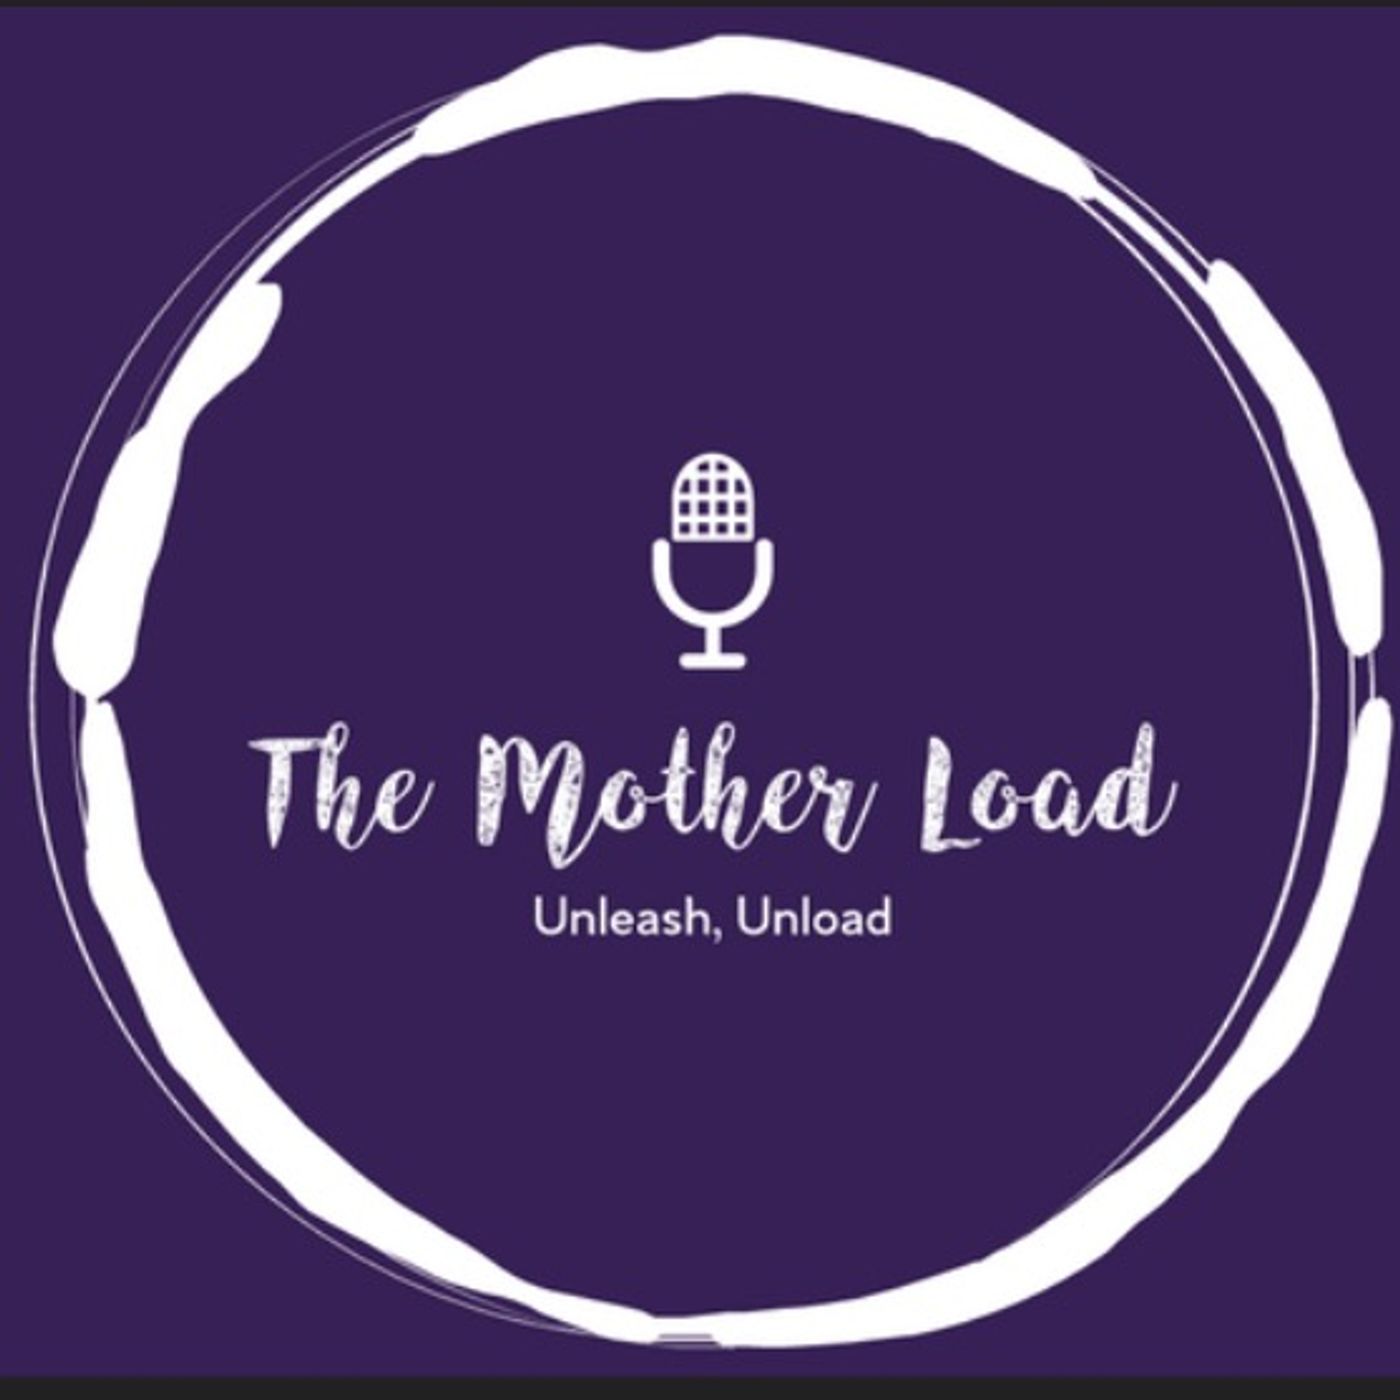 The Mother Load by LWB